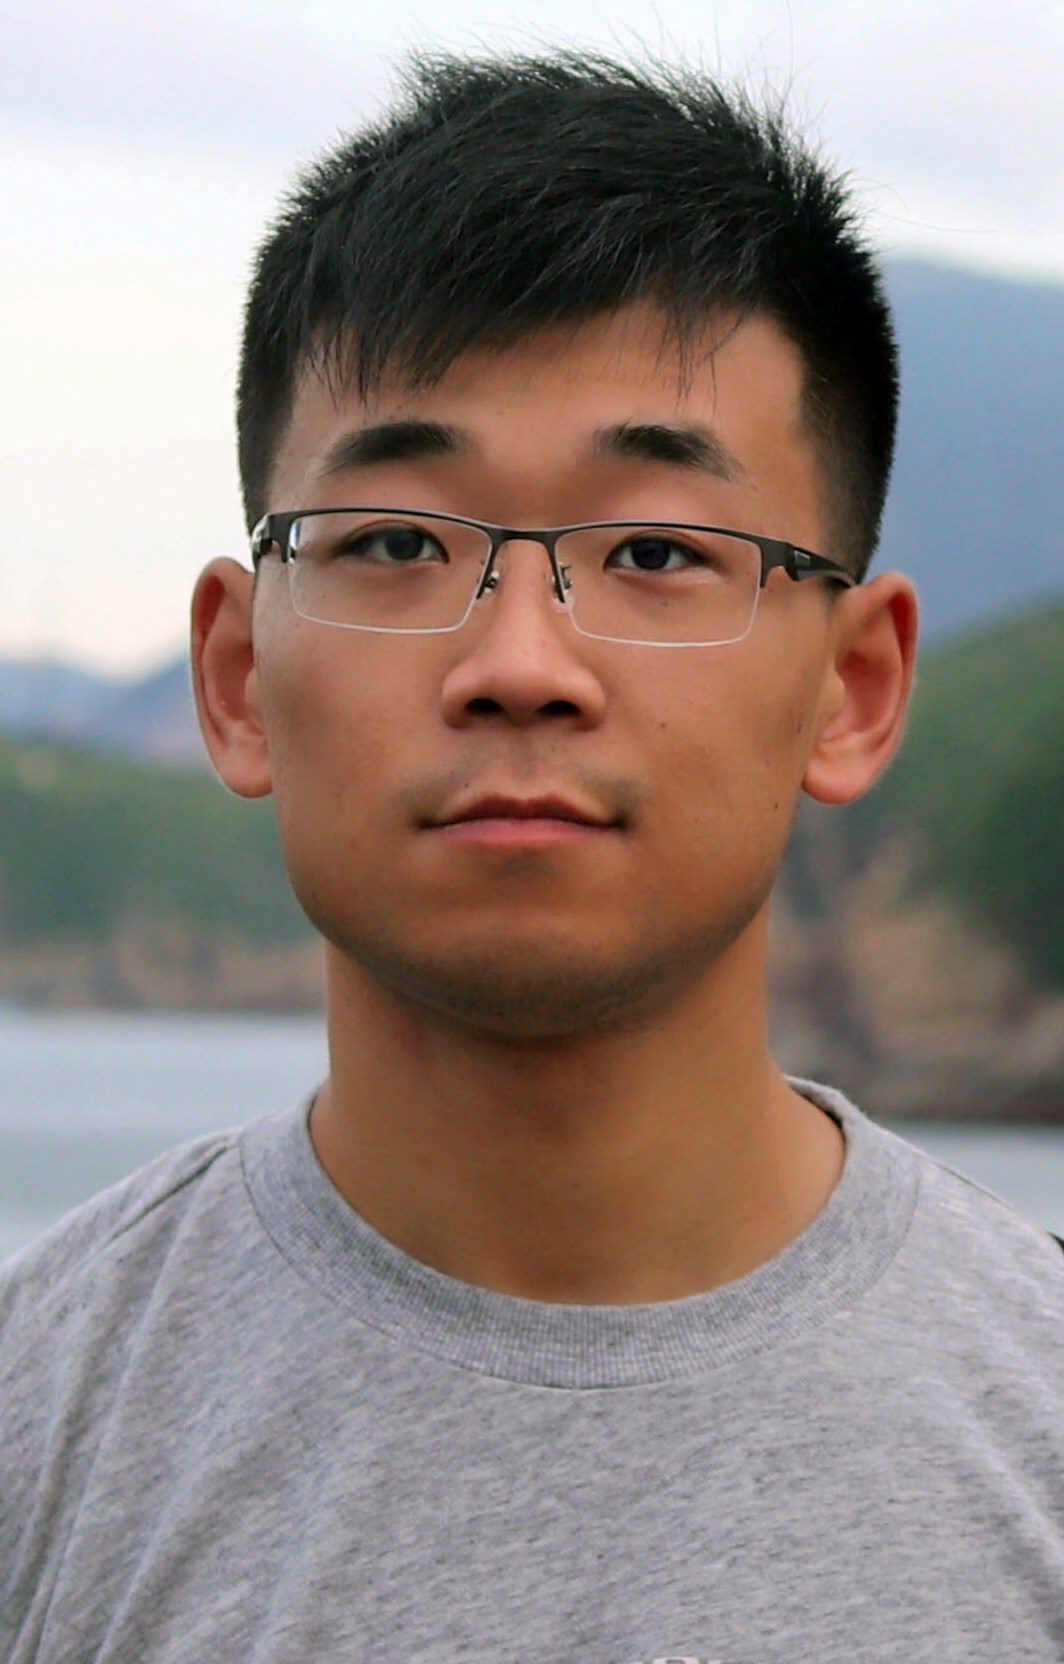 Chongyang (William) Zhou is a Doctoral Student at UMass Lowell.